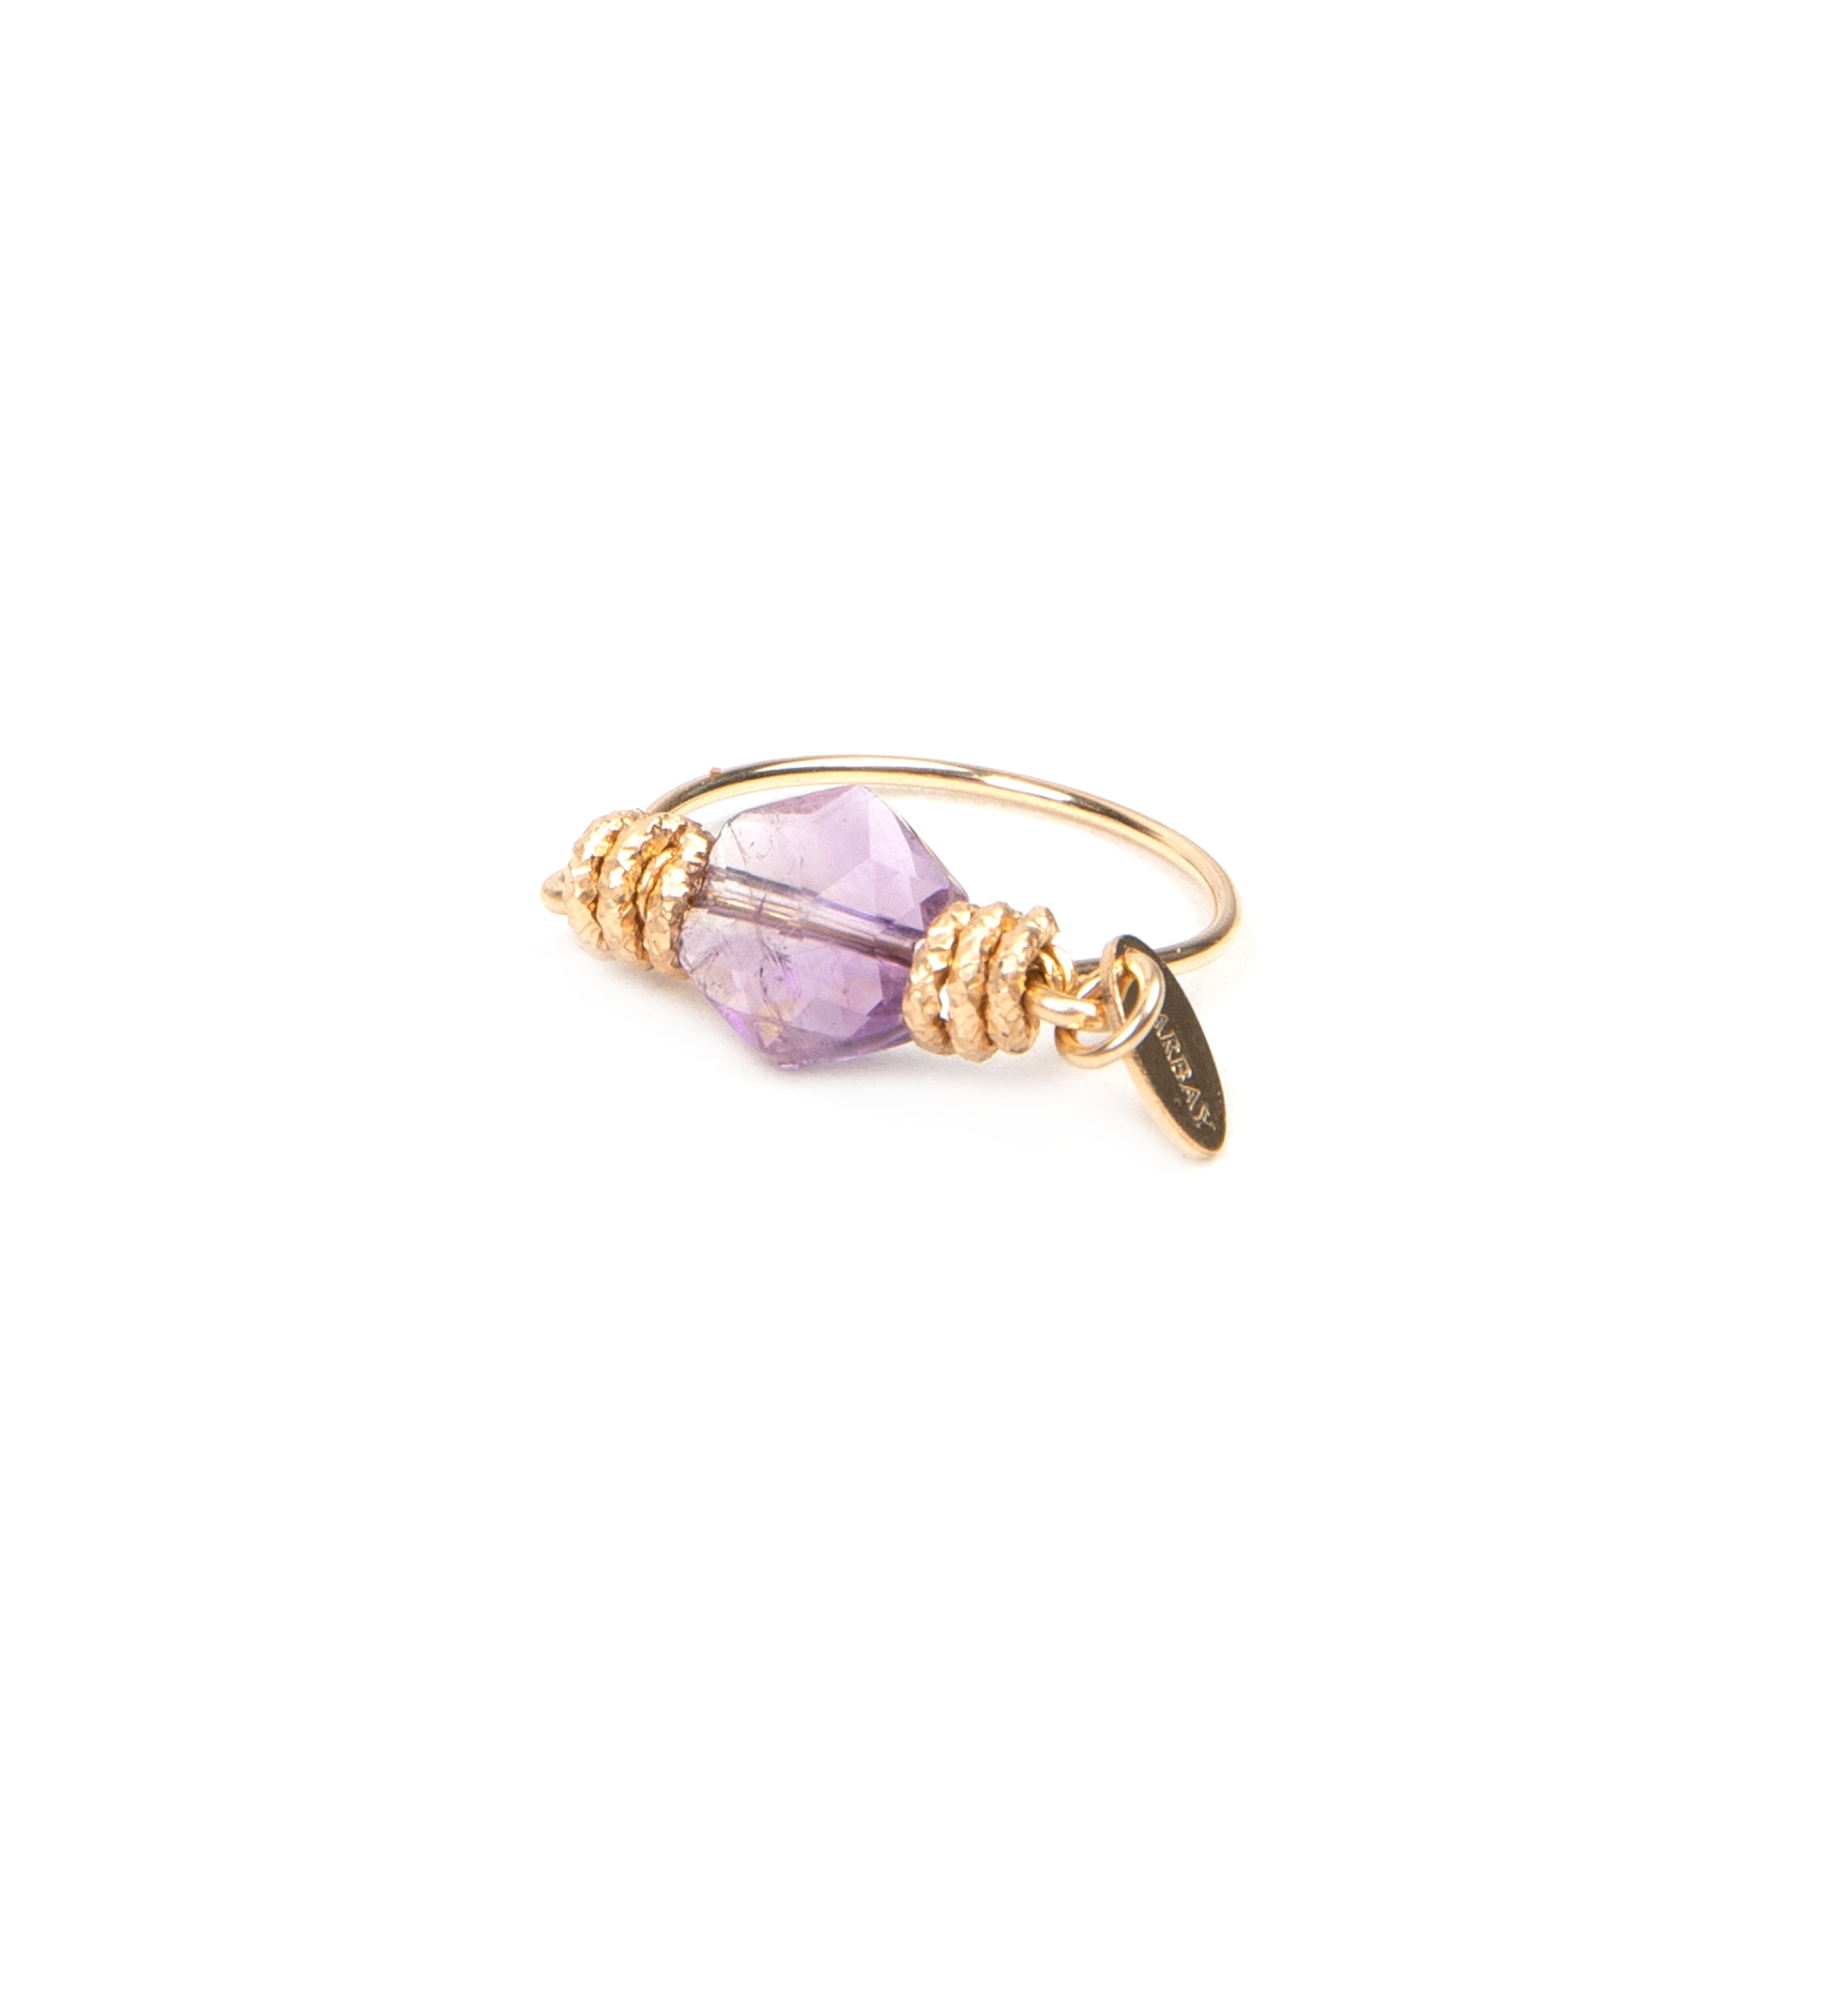 Solitaire Ring #1 (20mm) - Amethyst Rings TARBAY   